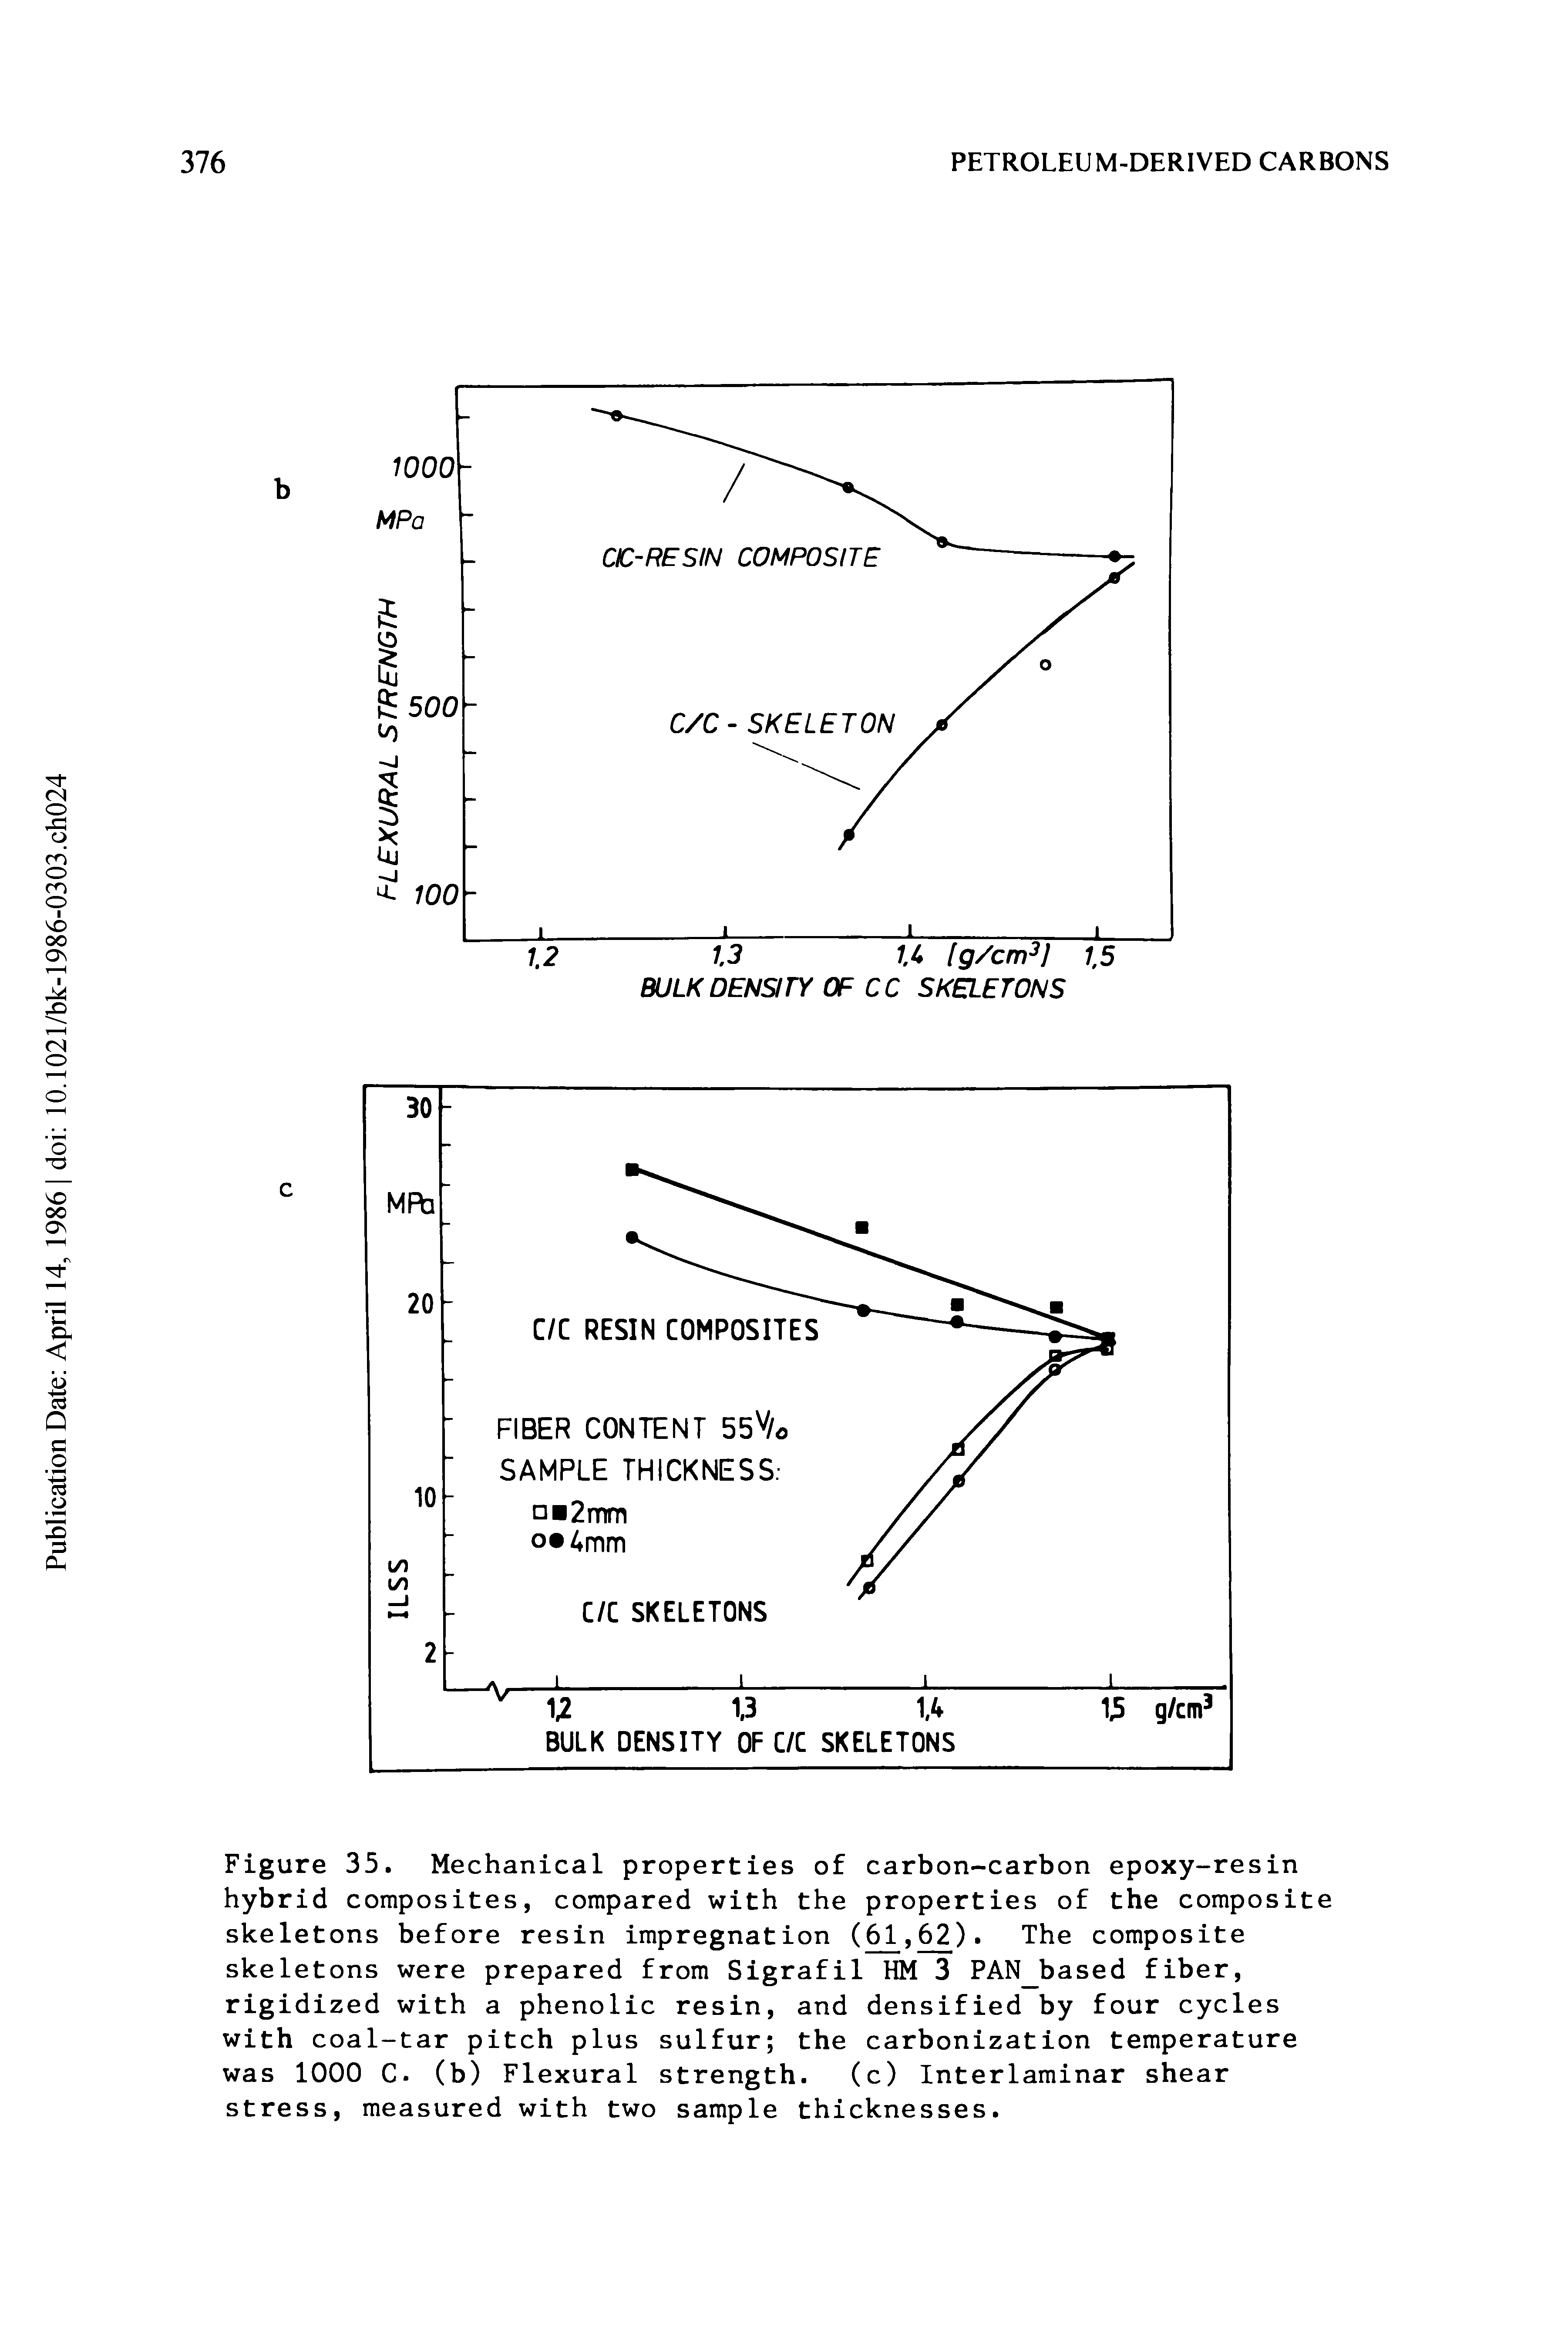 Figure 35. Mechanical properties of carbon-carbon epoxy-resin hybrid composites, compared with the properties of the composite skeletons before resin impregnation (61,62). The composite skeletons were prepared from Sigrafil HM 3 PAN based fiber, rigidized with a phenolic resin, and densified by four cycles with coal-tar pitch plus sulfur the carbonization temperature was 1000 C. (b) Flexural strength. (c) Interlaminar shear stress, measured with two sample thicknesses.